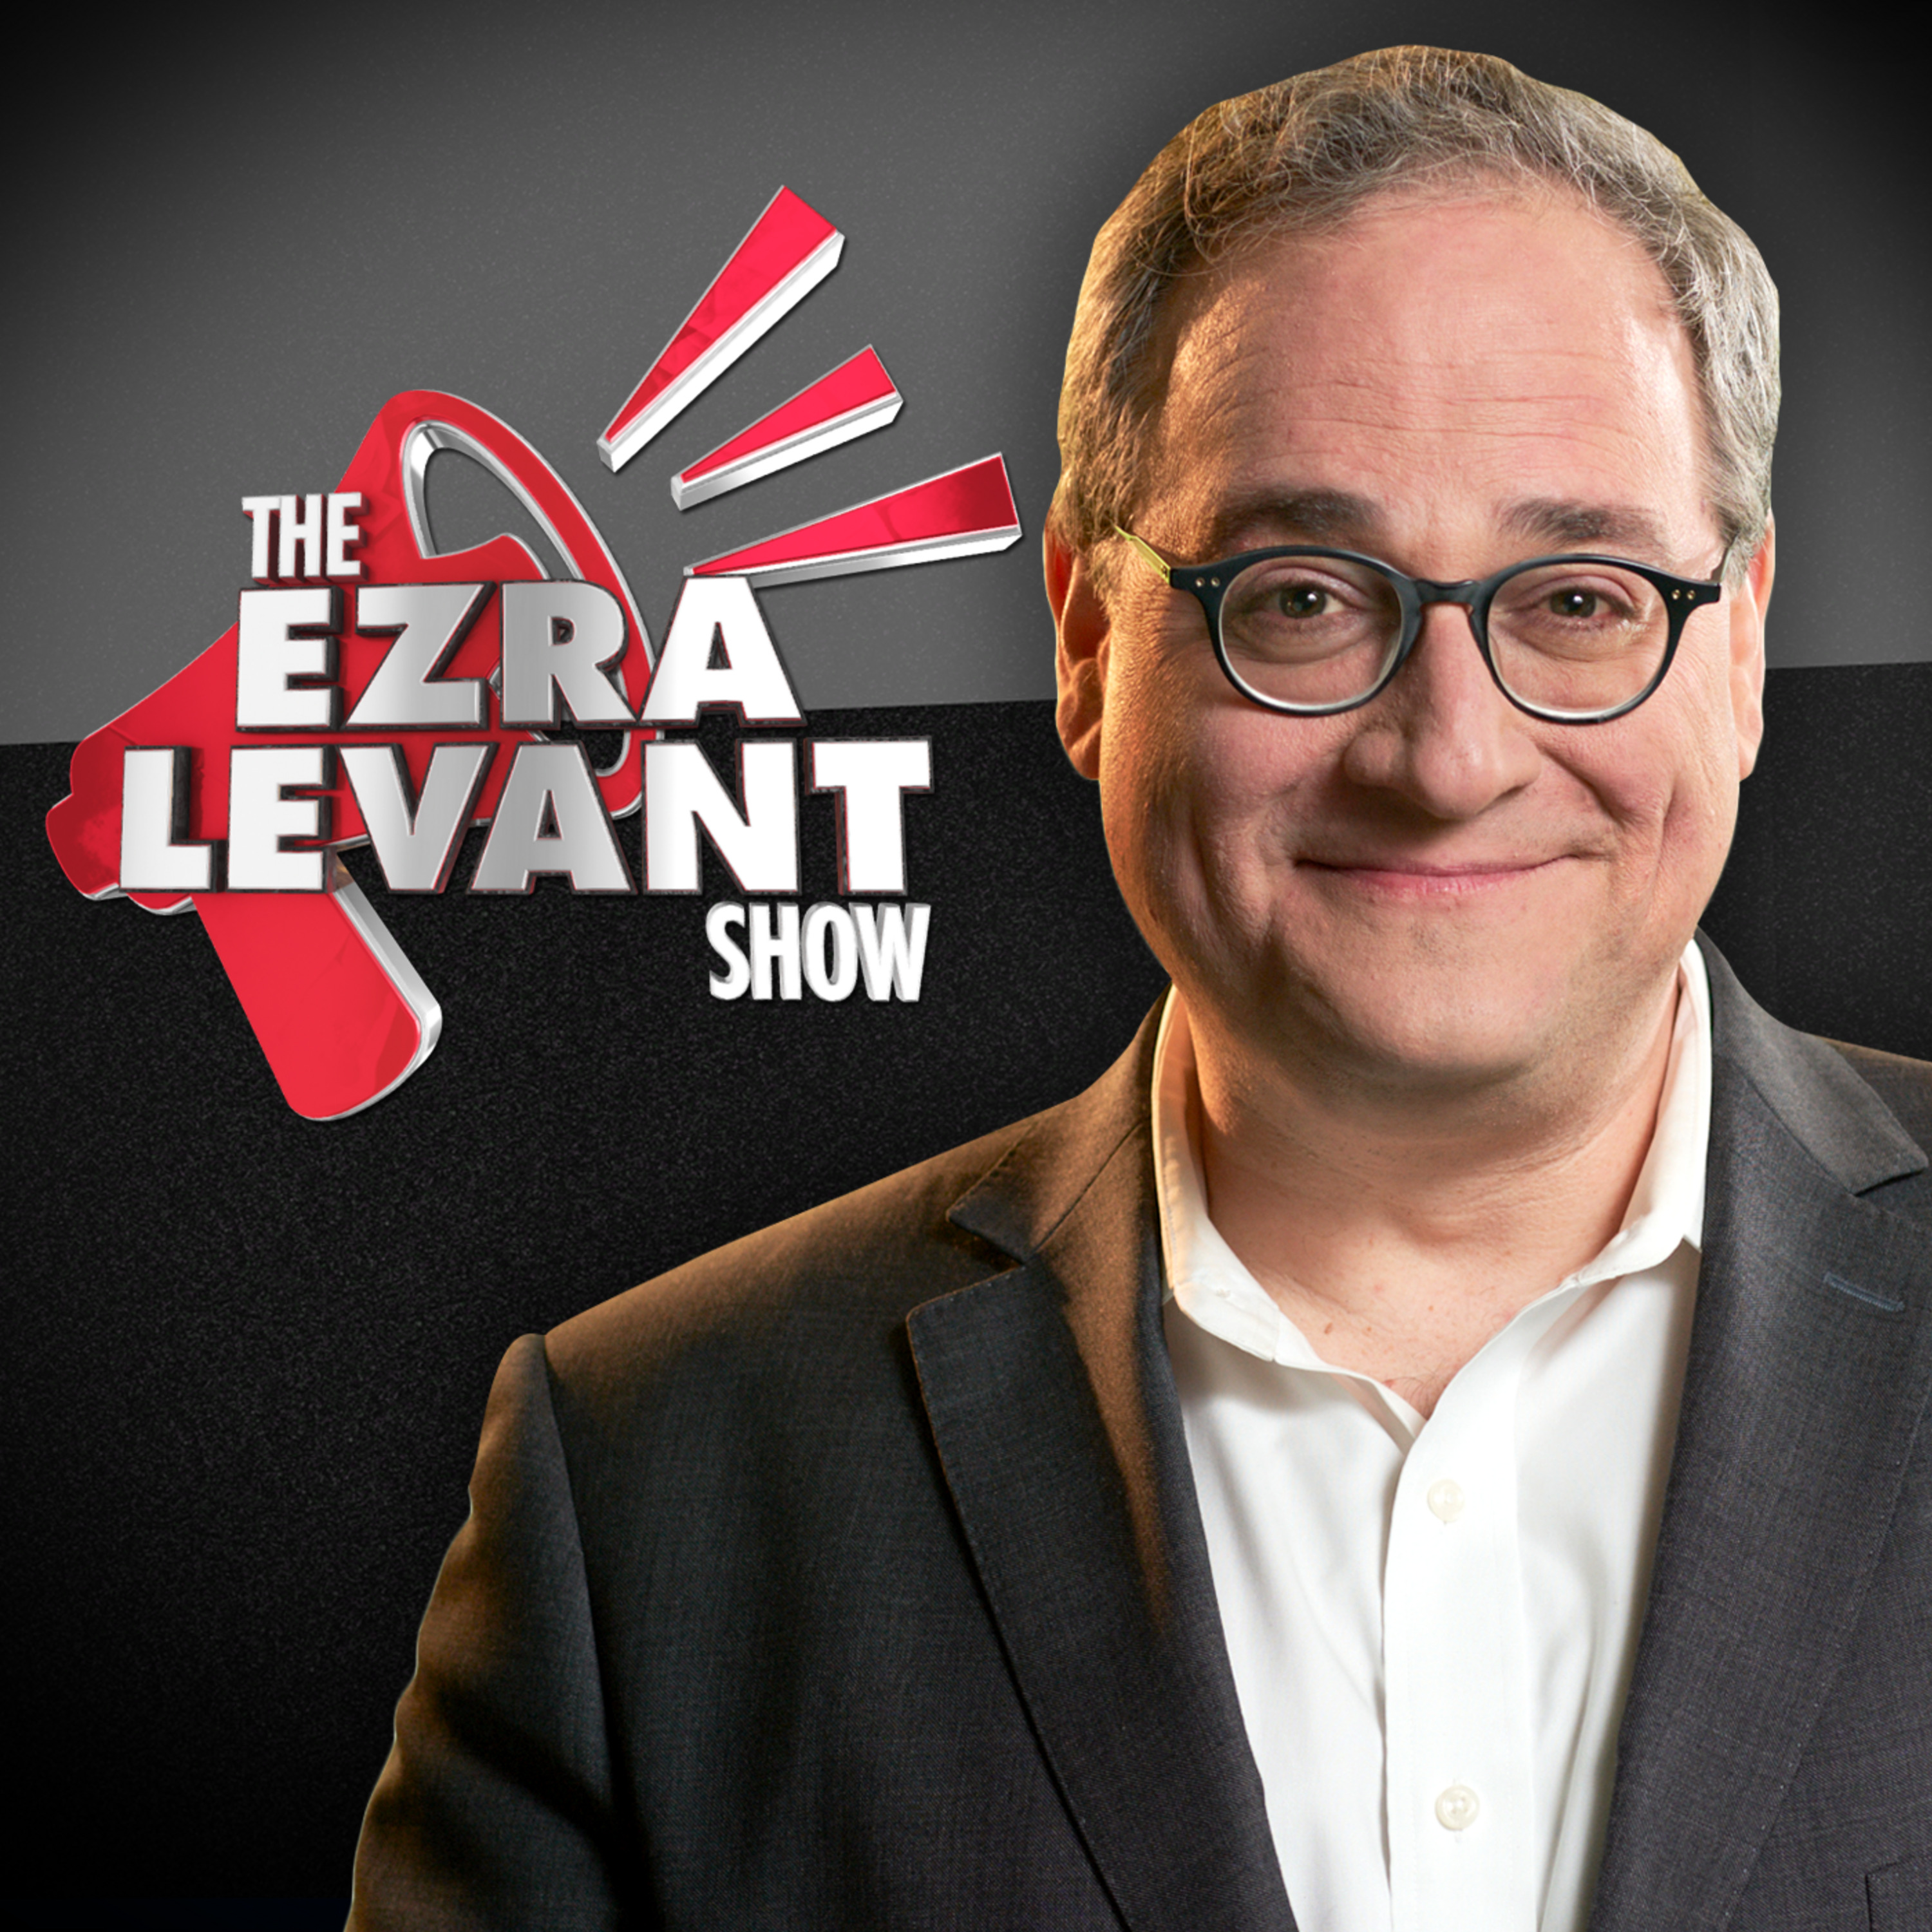 EZRA LEVANT | Is Trudeau actually going to get rid of ArriveCAN?